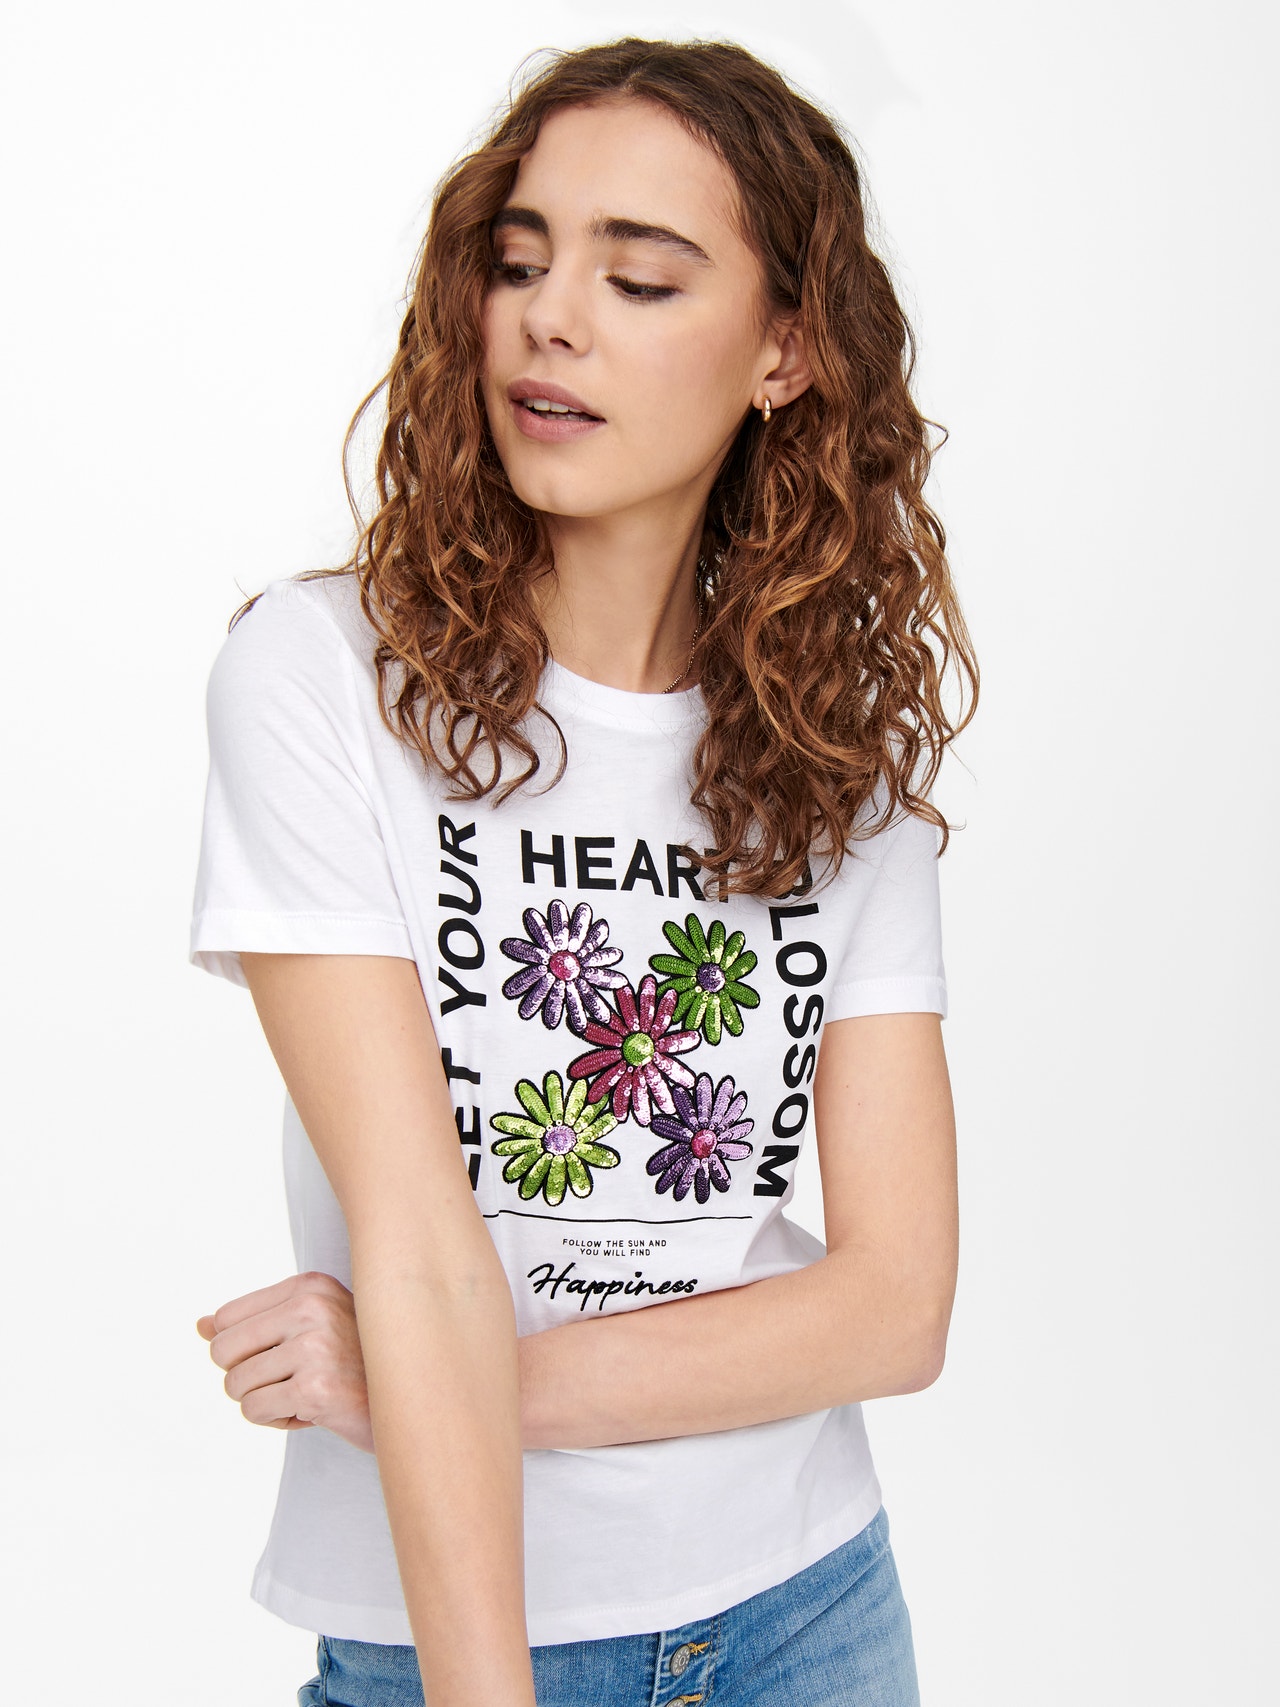 ONLY Printed T-shirt -Bright White - 15259095